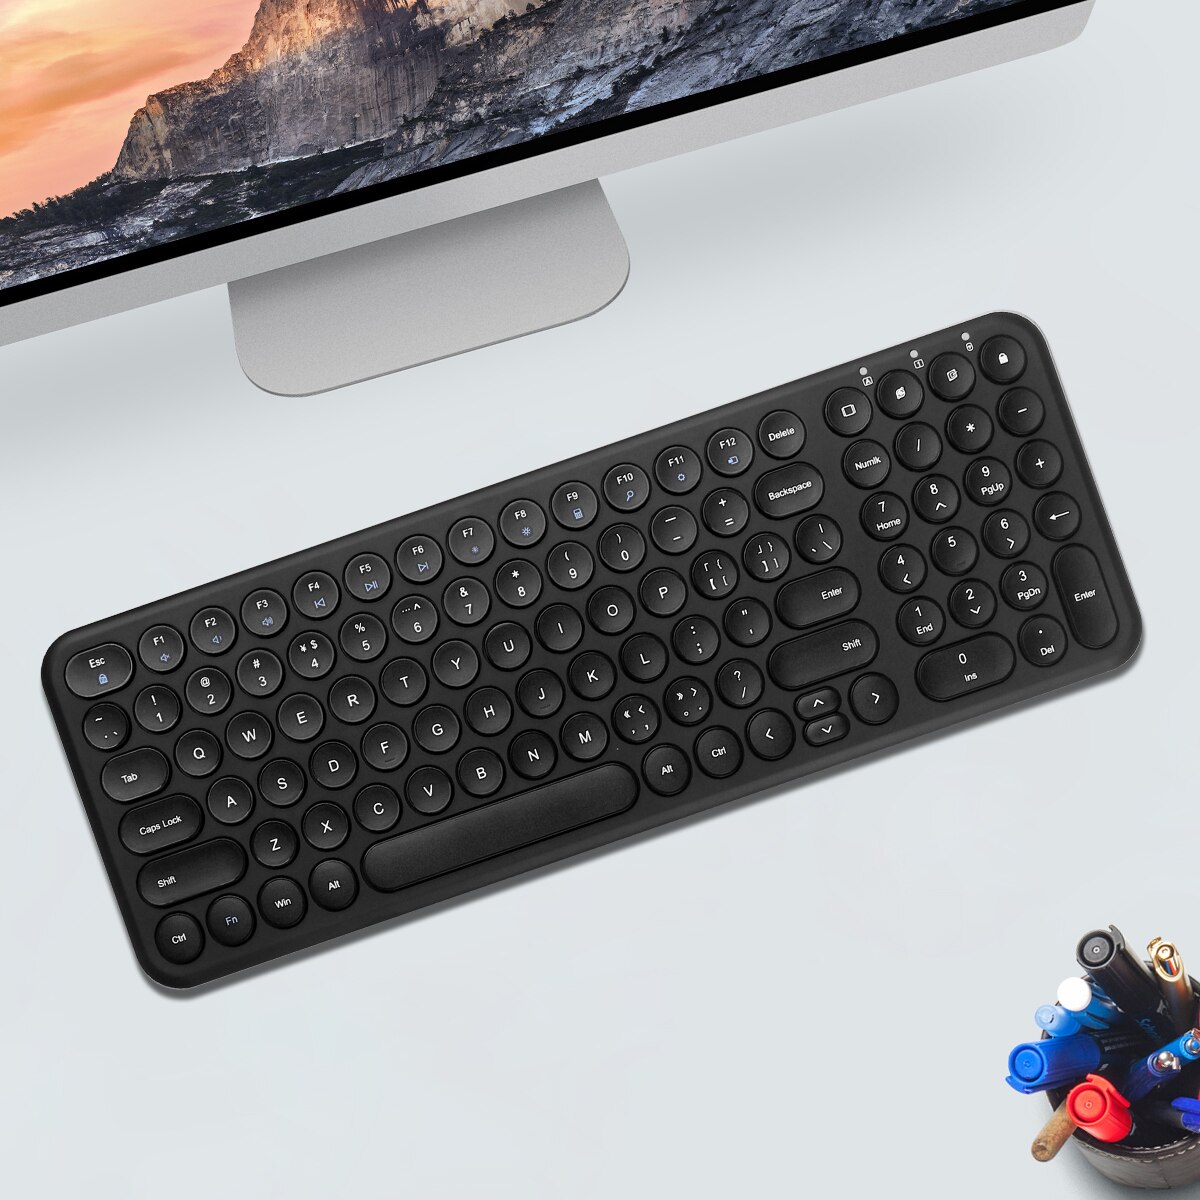 2.4G Wireless Rechargeable Gaming Keyboard And Mouse Keyboard Gaming Mouse For Macbook PC Gamer Computer Laptop Keyboard: Black Keyboard